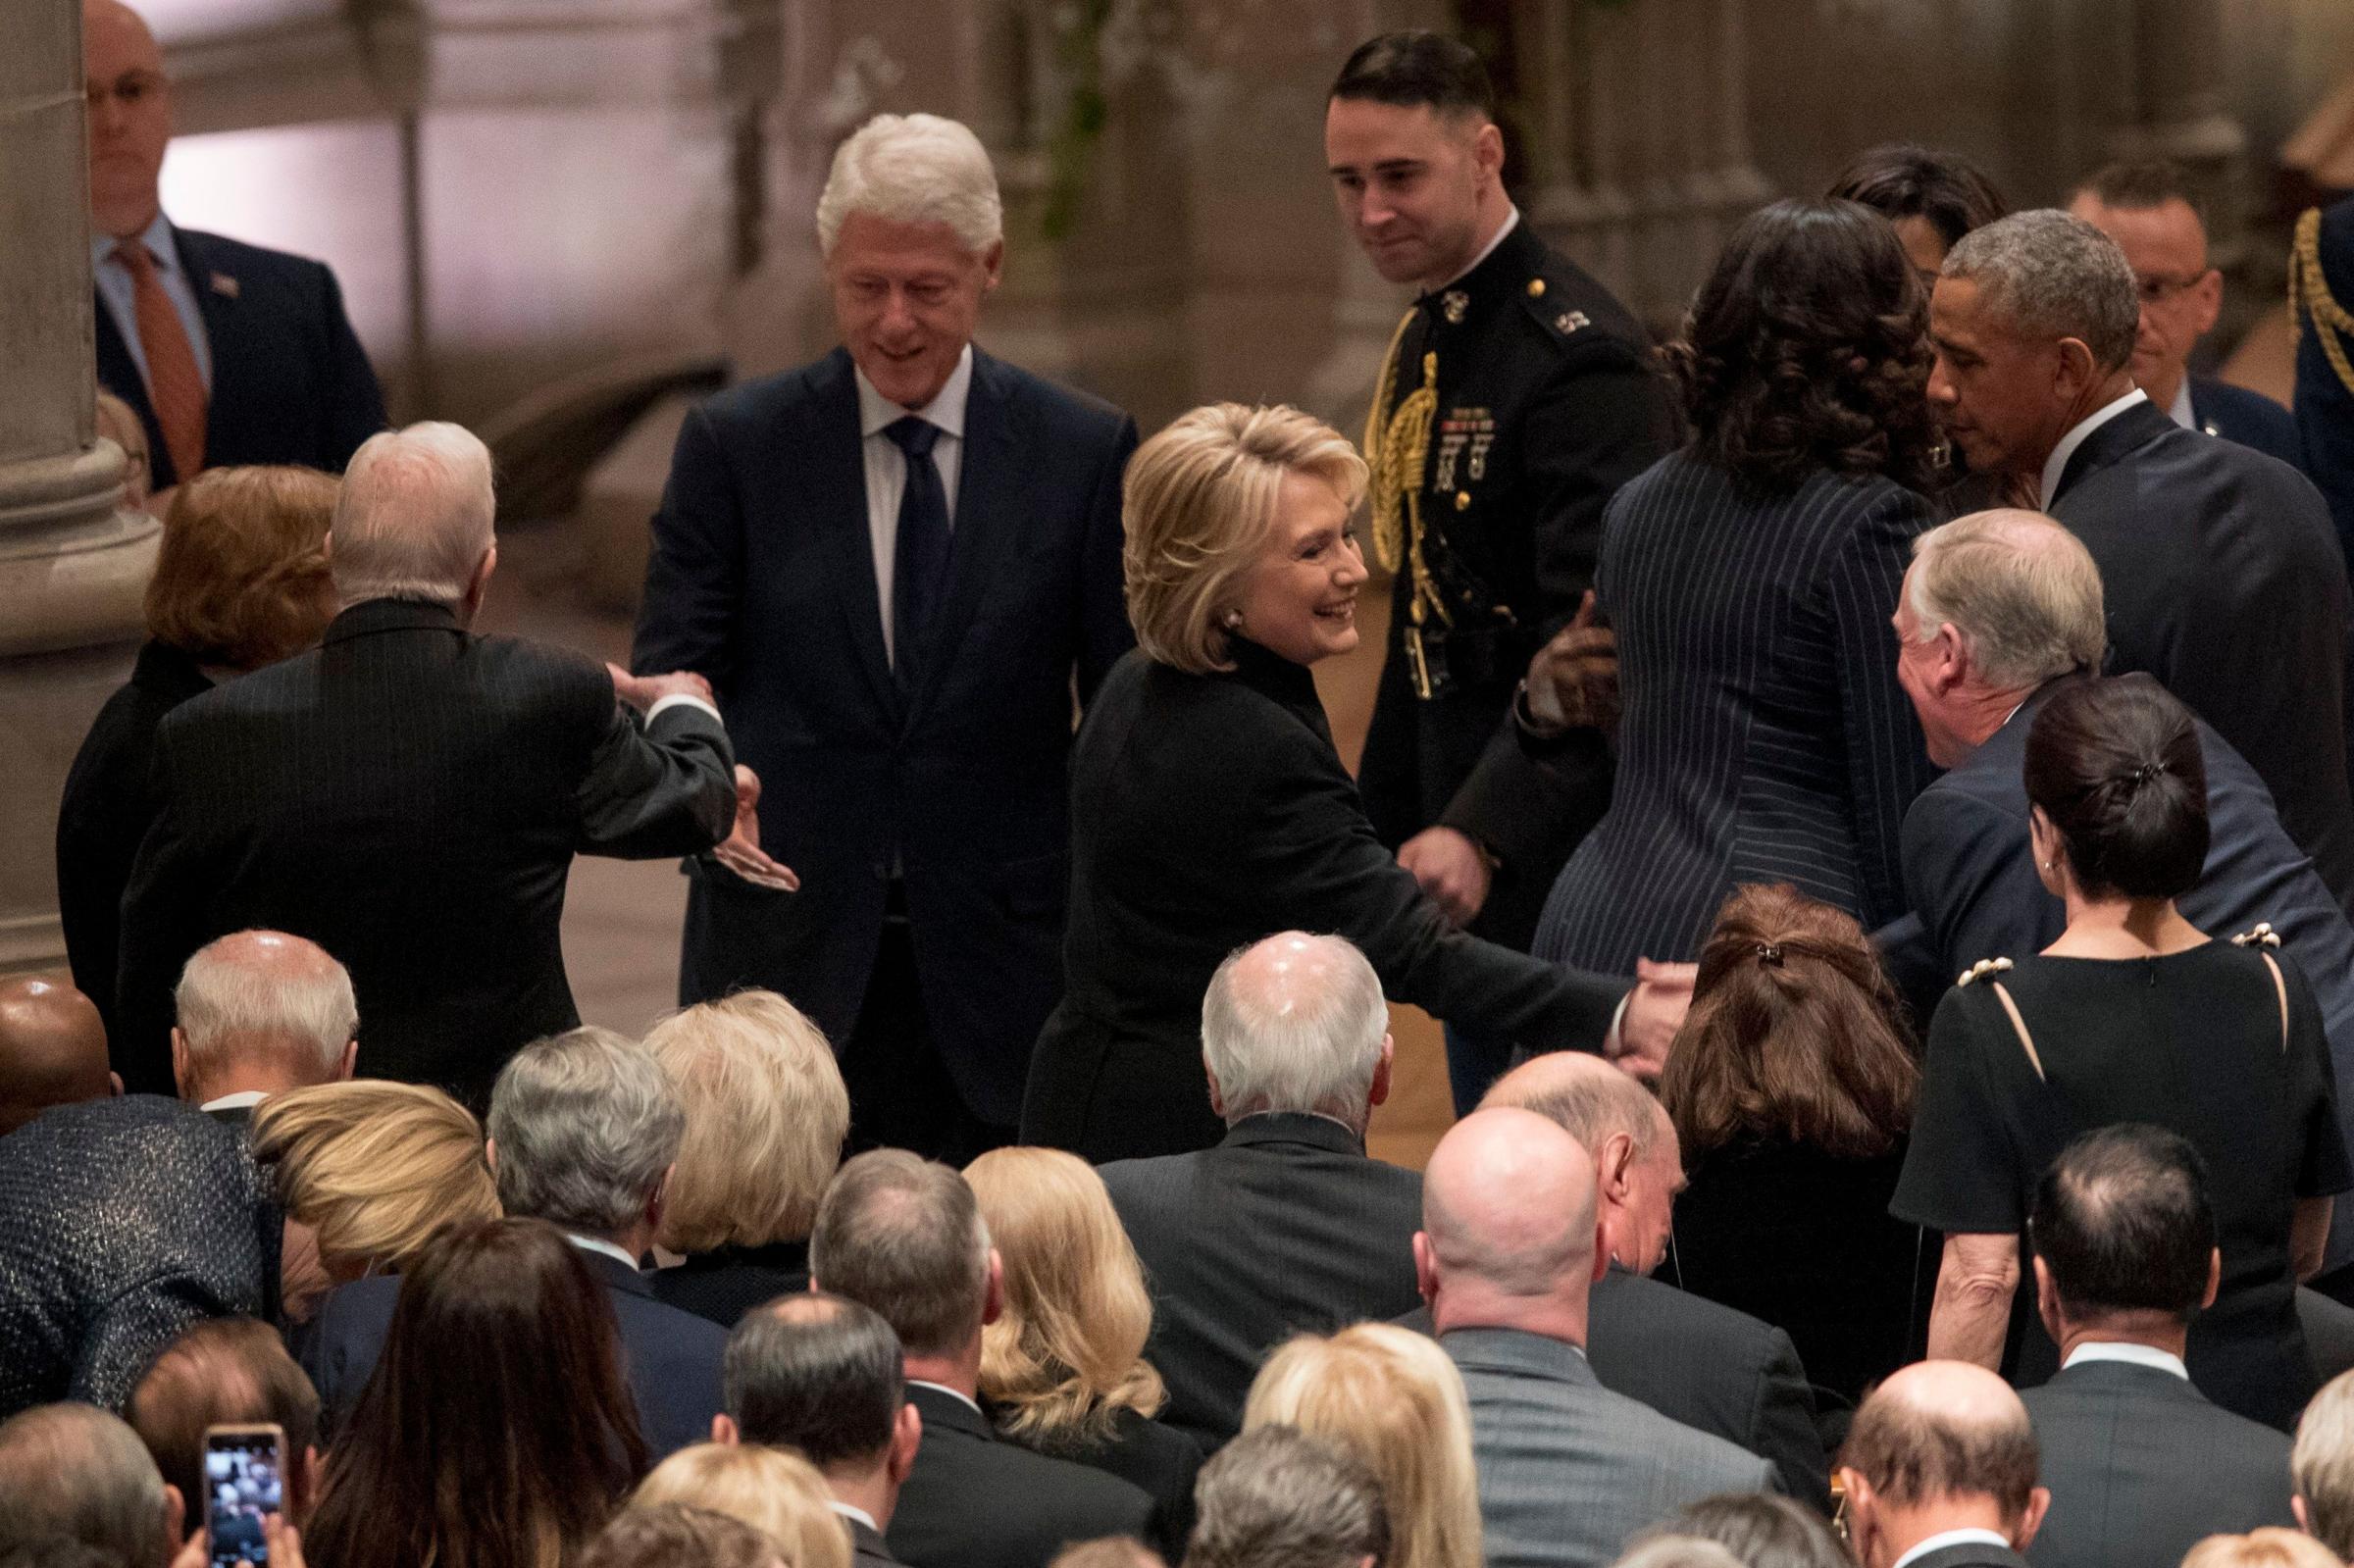 Bill and Hillary Clinton greet people at the funeral of former President George H.W. Bush at the National Cathedral